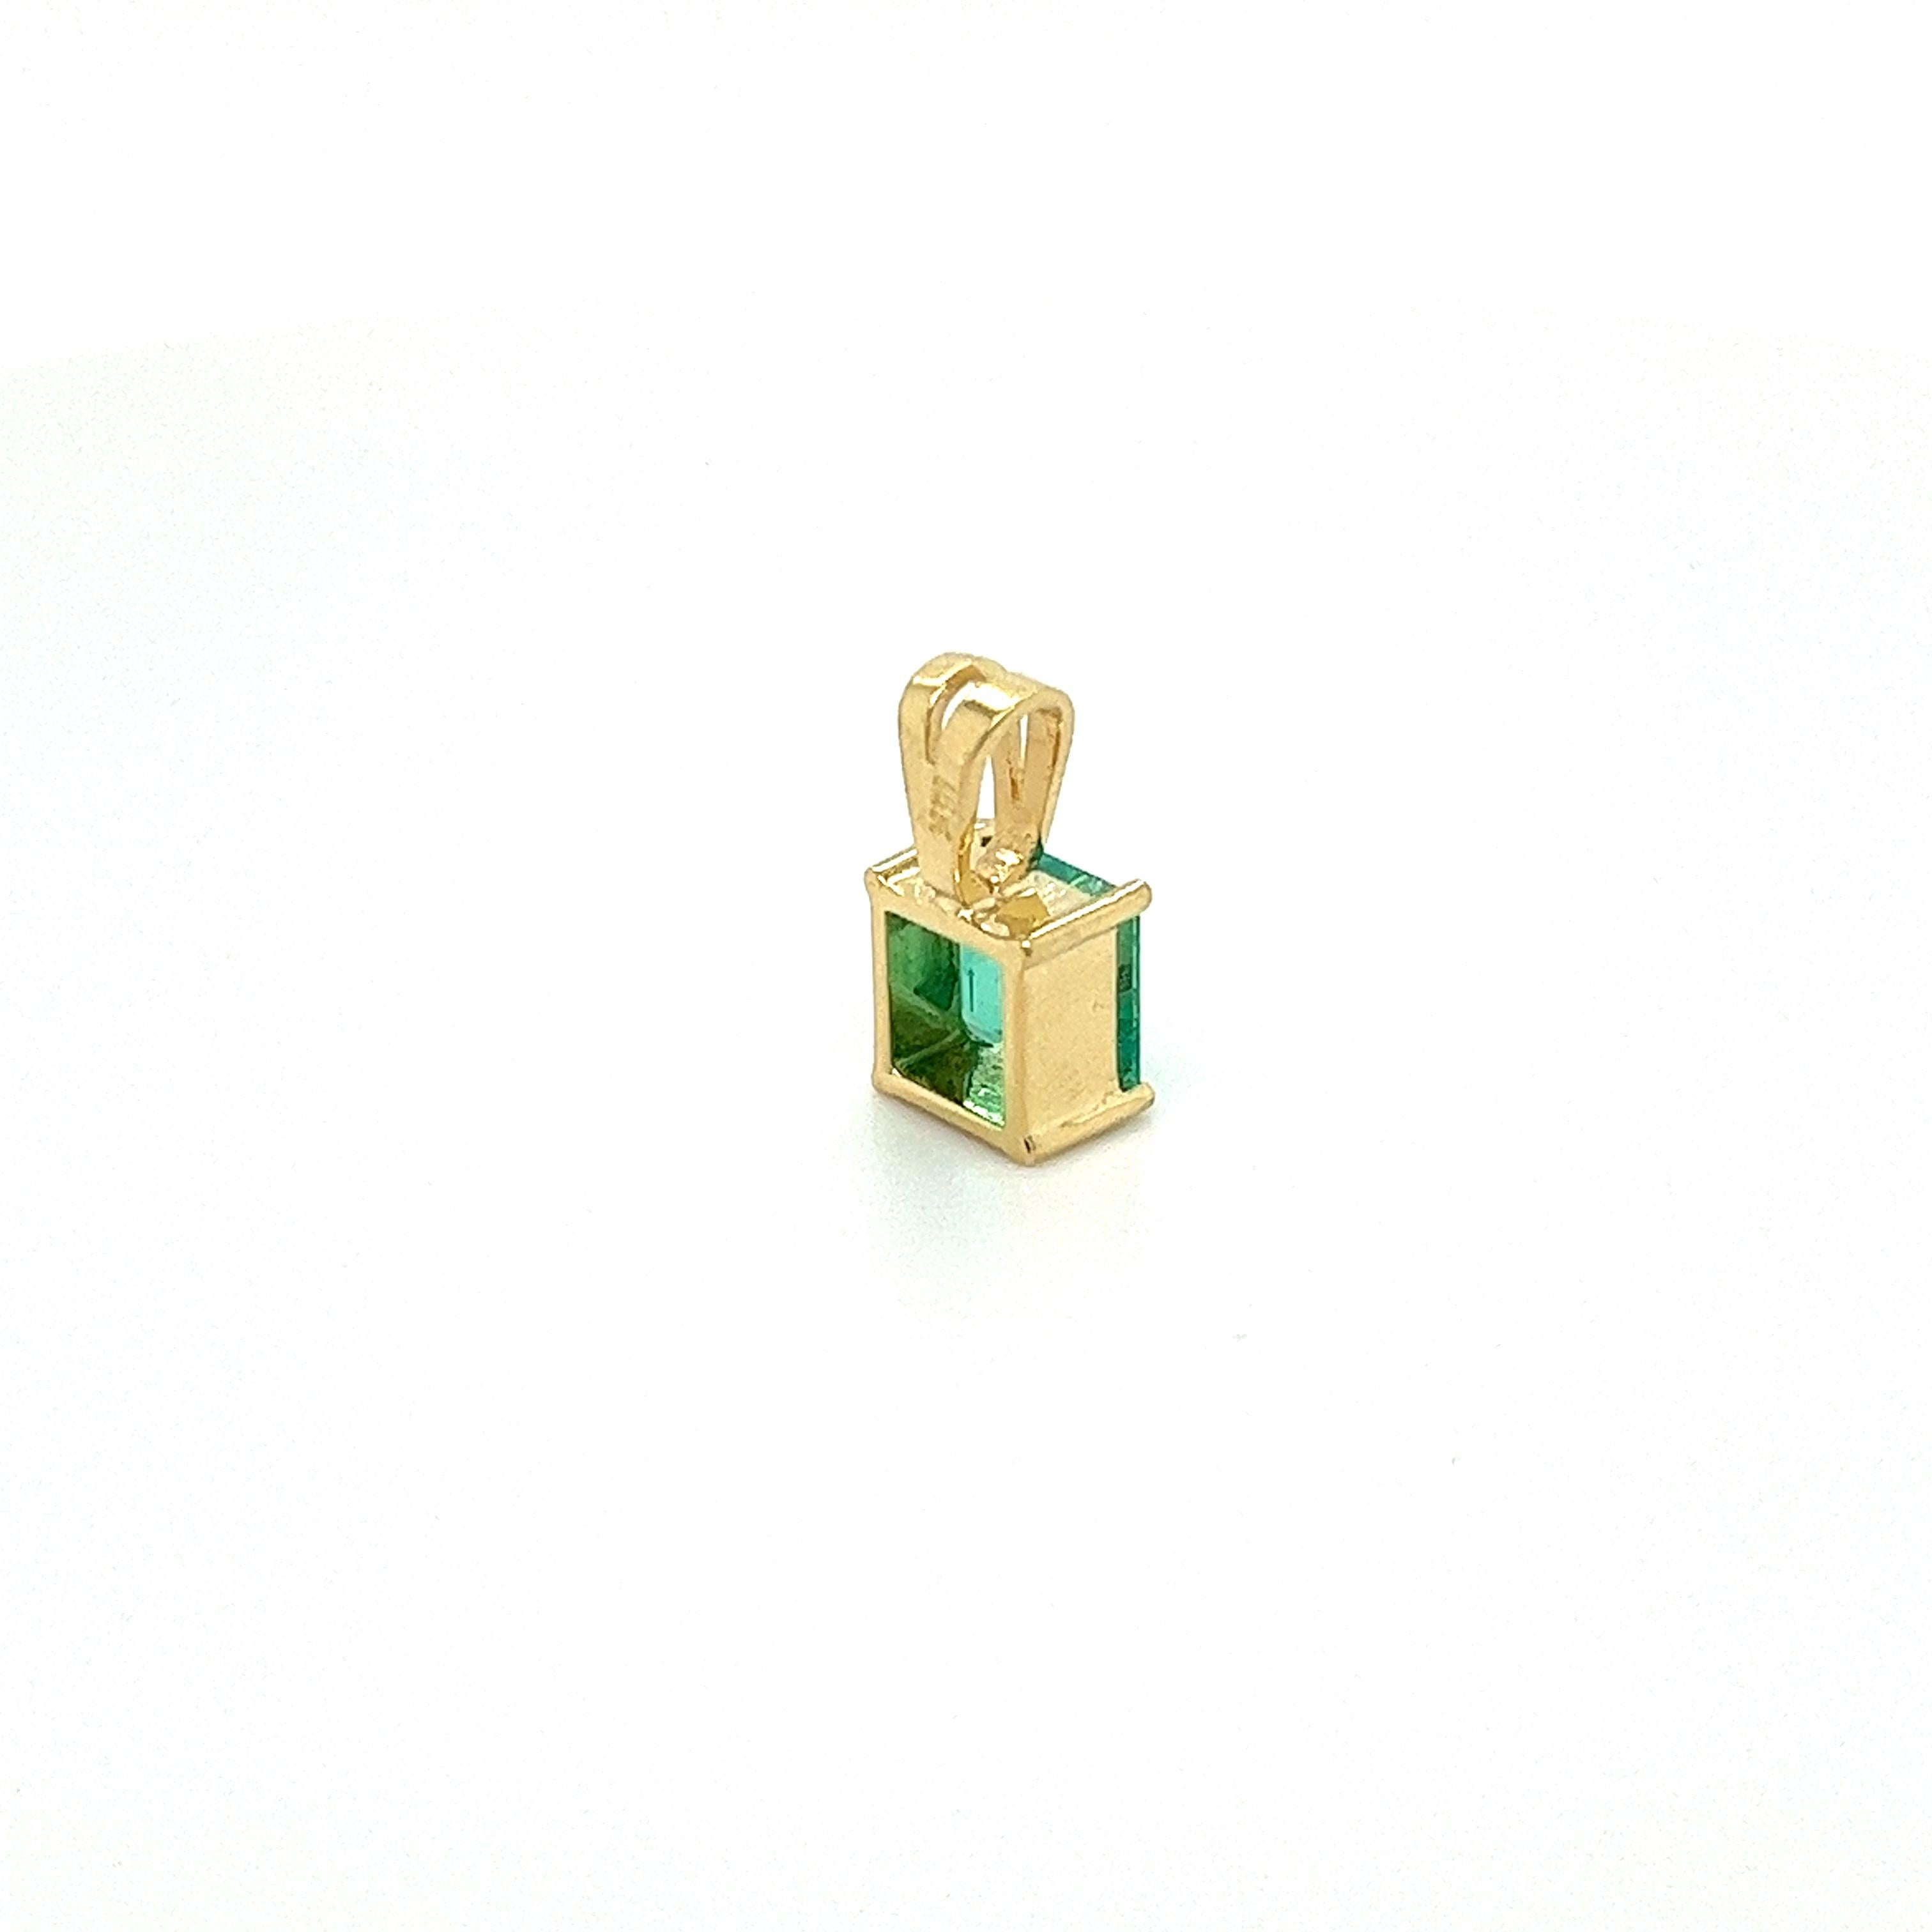 Modernist 1.20 Carat Colombian Emerald Solitaire Pendant Necklace in 18K Yellow Gold